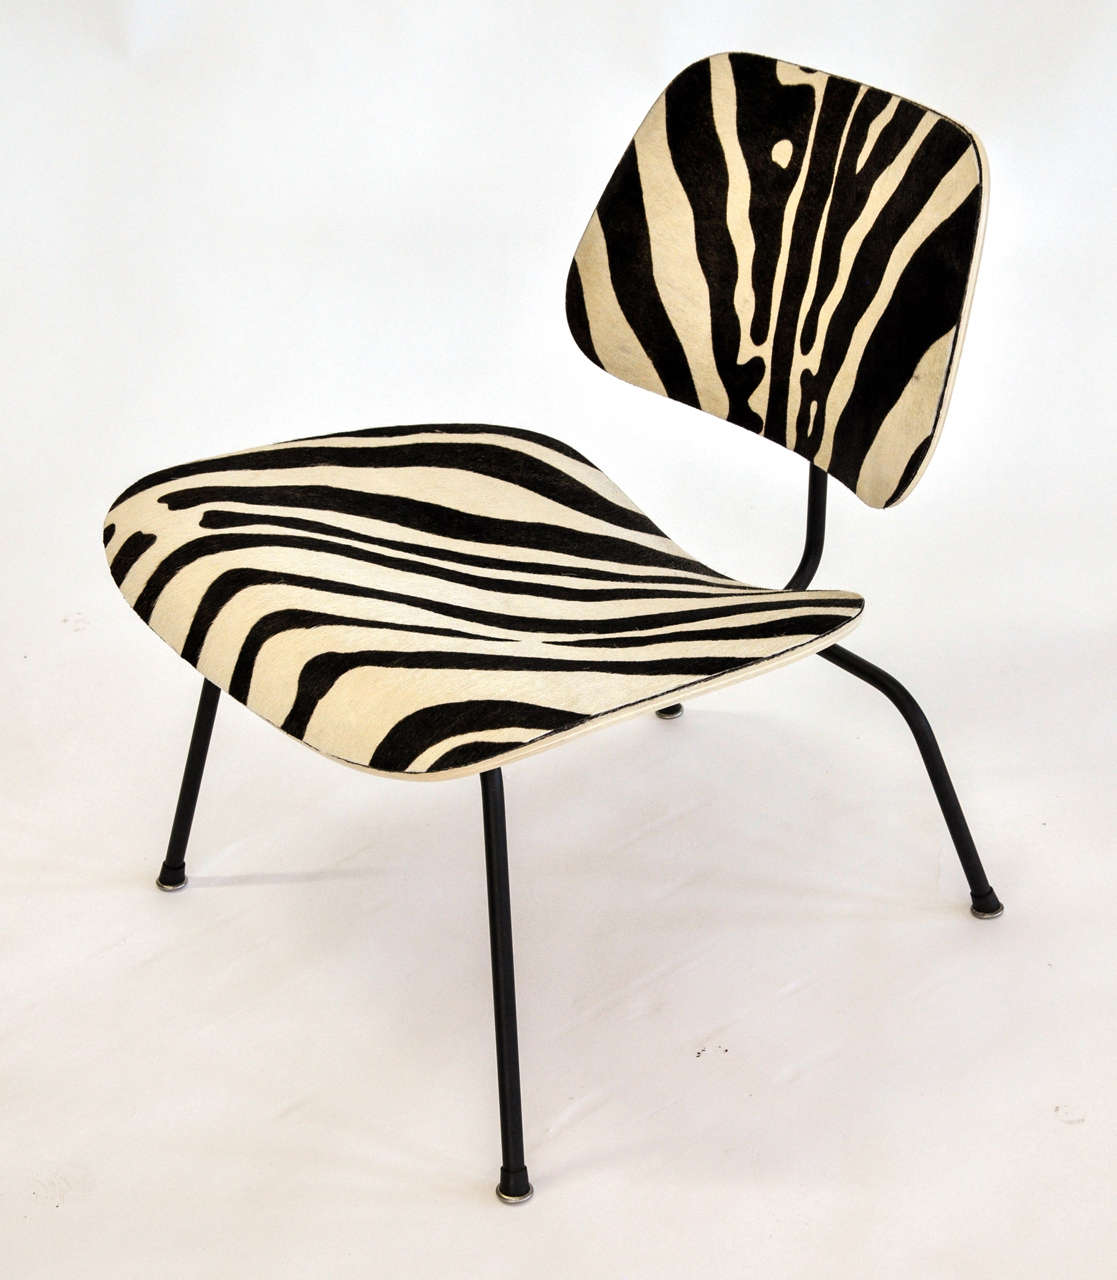 The LCM chair by Charles and Ray Eames for Herman Miller has been expertly reupholstered in a zebra print cowhide.